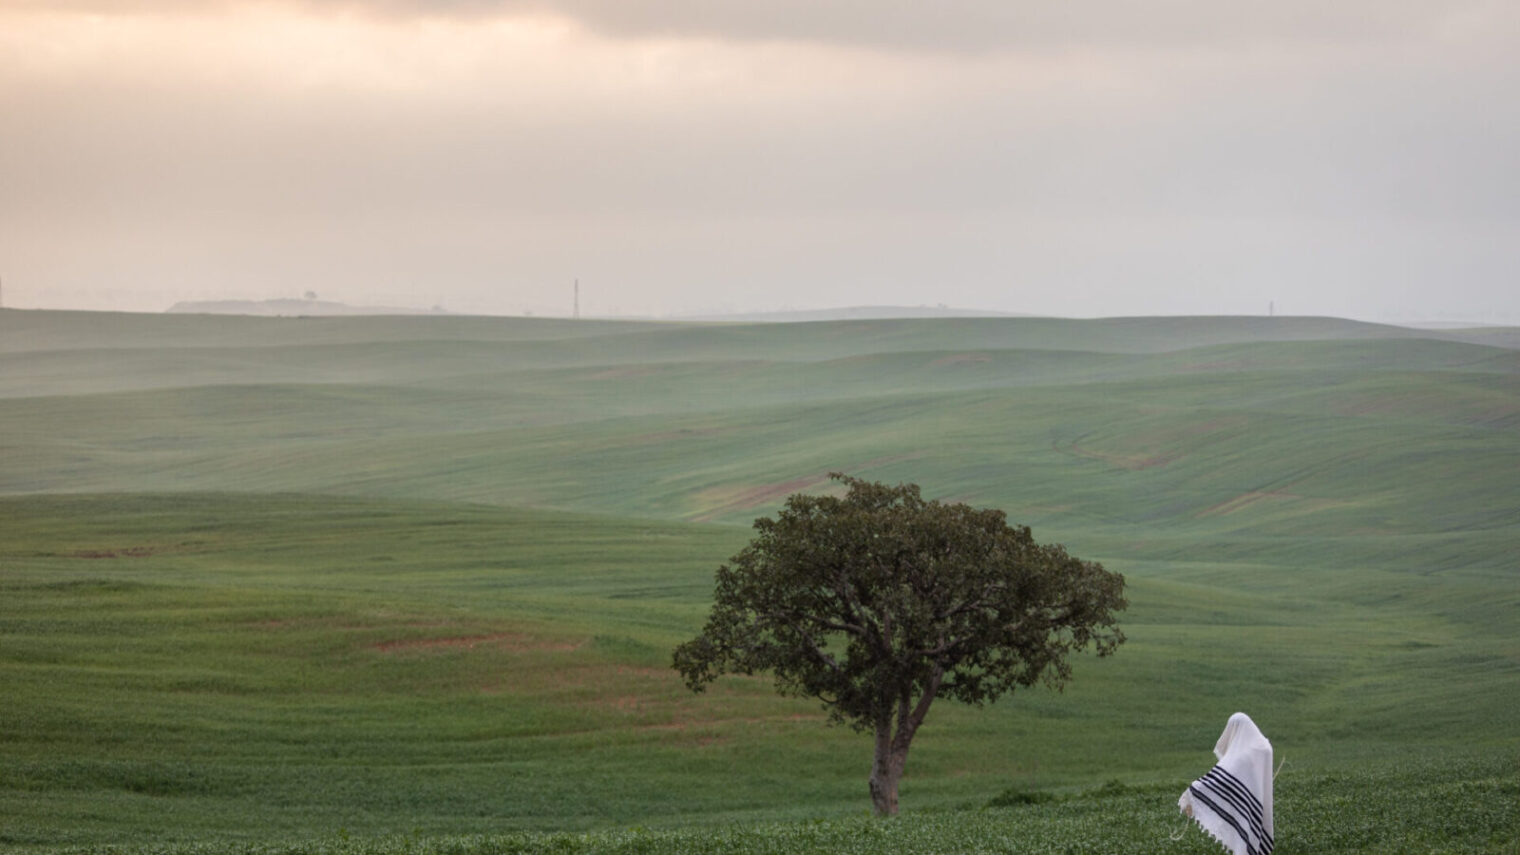 A man covers himself with a prayer shawl while praying near a lone tree in a field in Ruhama Badlands, southern Israel on February 16, 2020. Photo by Aharon Krohn/Flash90